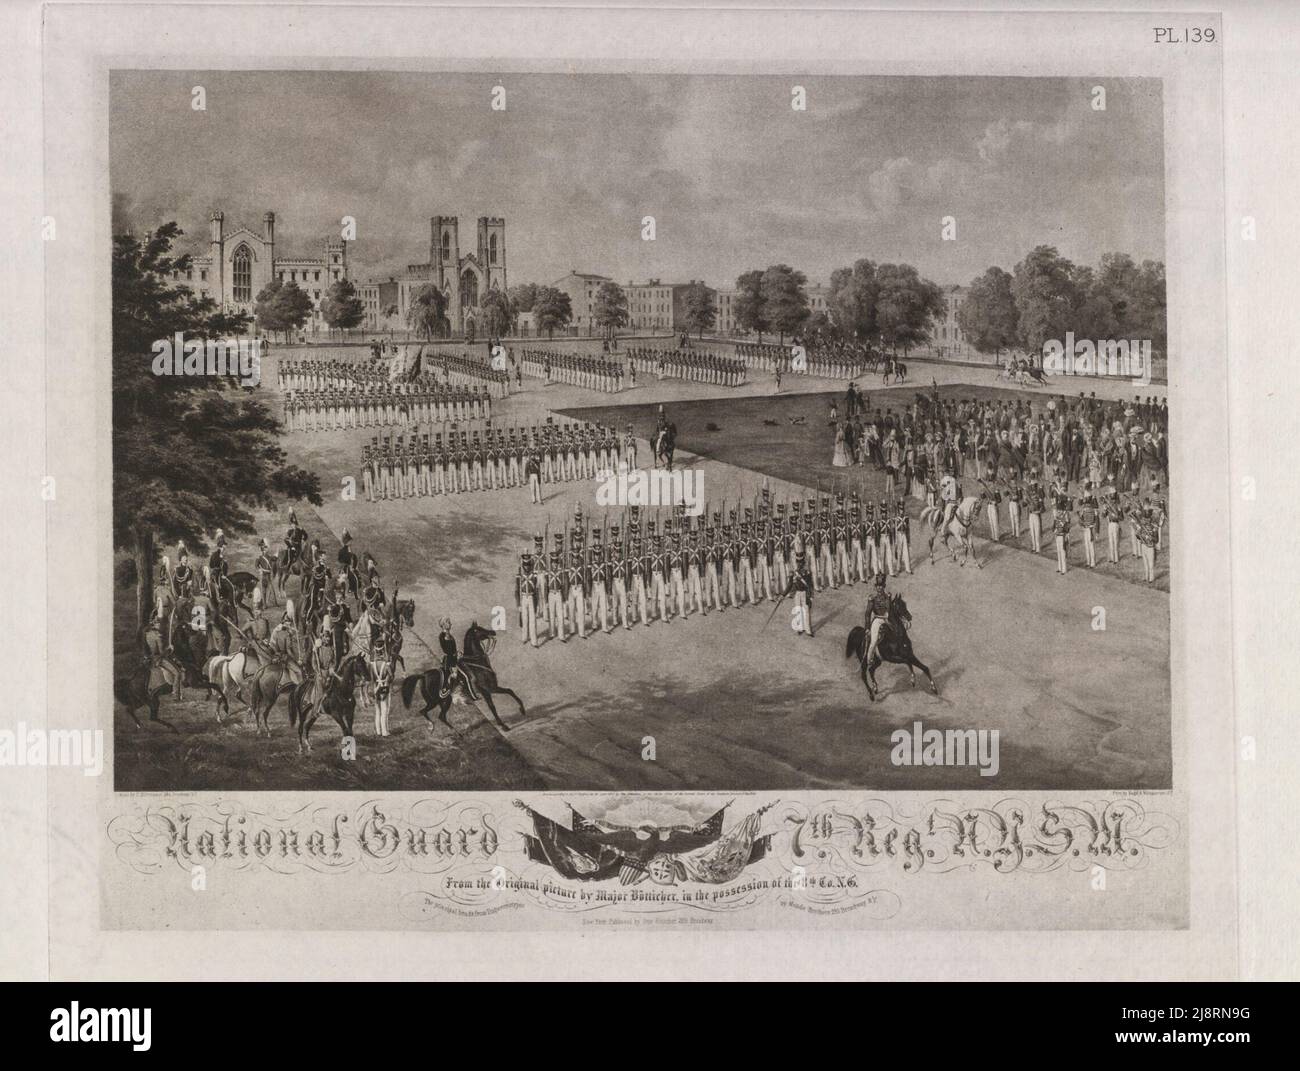 National Guard 7th Regiment N.Y.S.M The iconography of Manhattan Island, 1498-1909 compiled from original sources and illustrated by photo-intaglio reproductions of important maps, plans, views, and documents in public and private collections - Volume 3 by Isaac Newton Phelps Stokes, Publisher New York : Robert H. Dodd 1918 Stock Photo